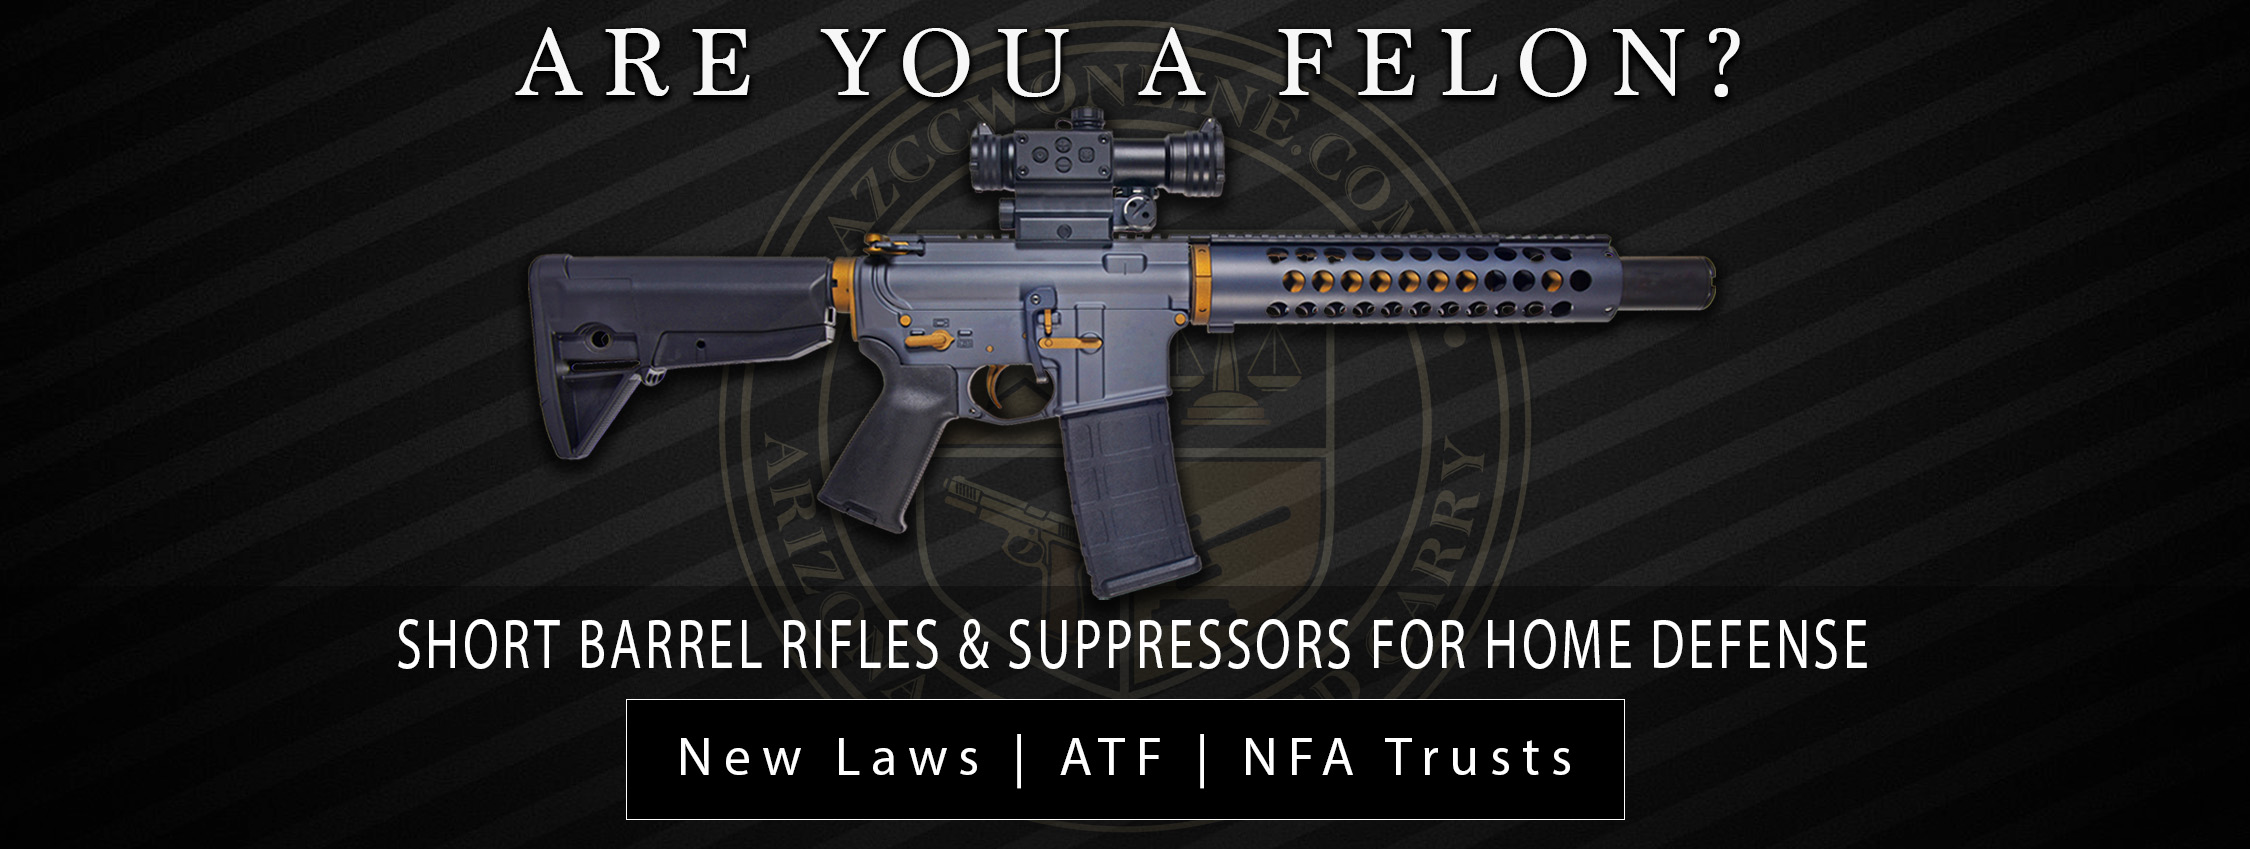 NFA Gun Trusts in Arizona | Comply with New Firearms Laws